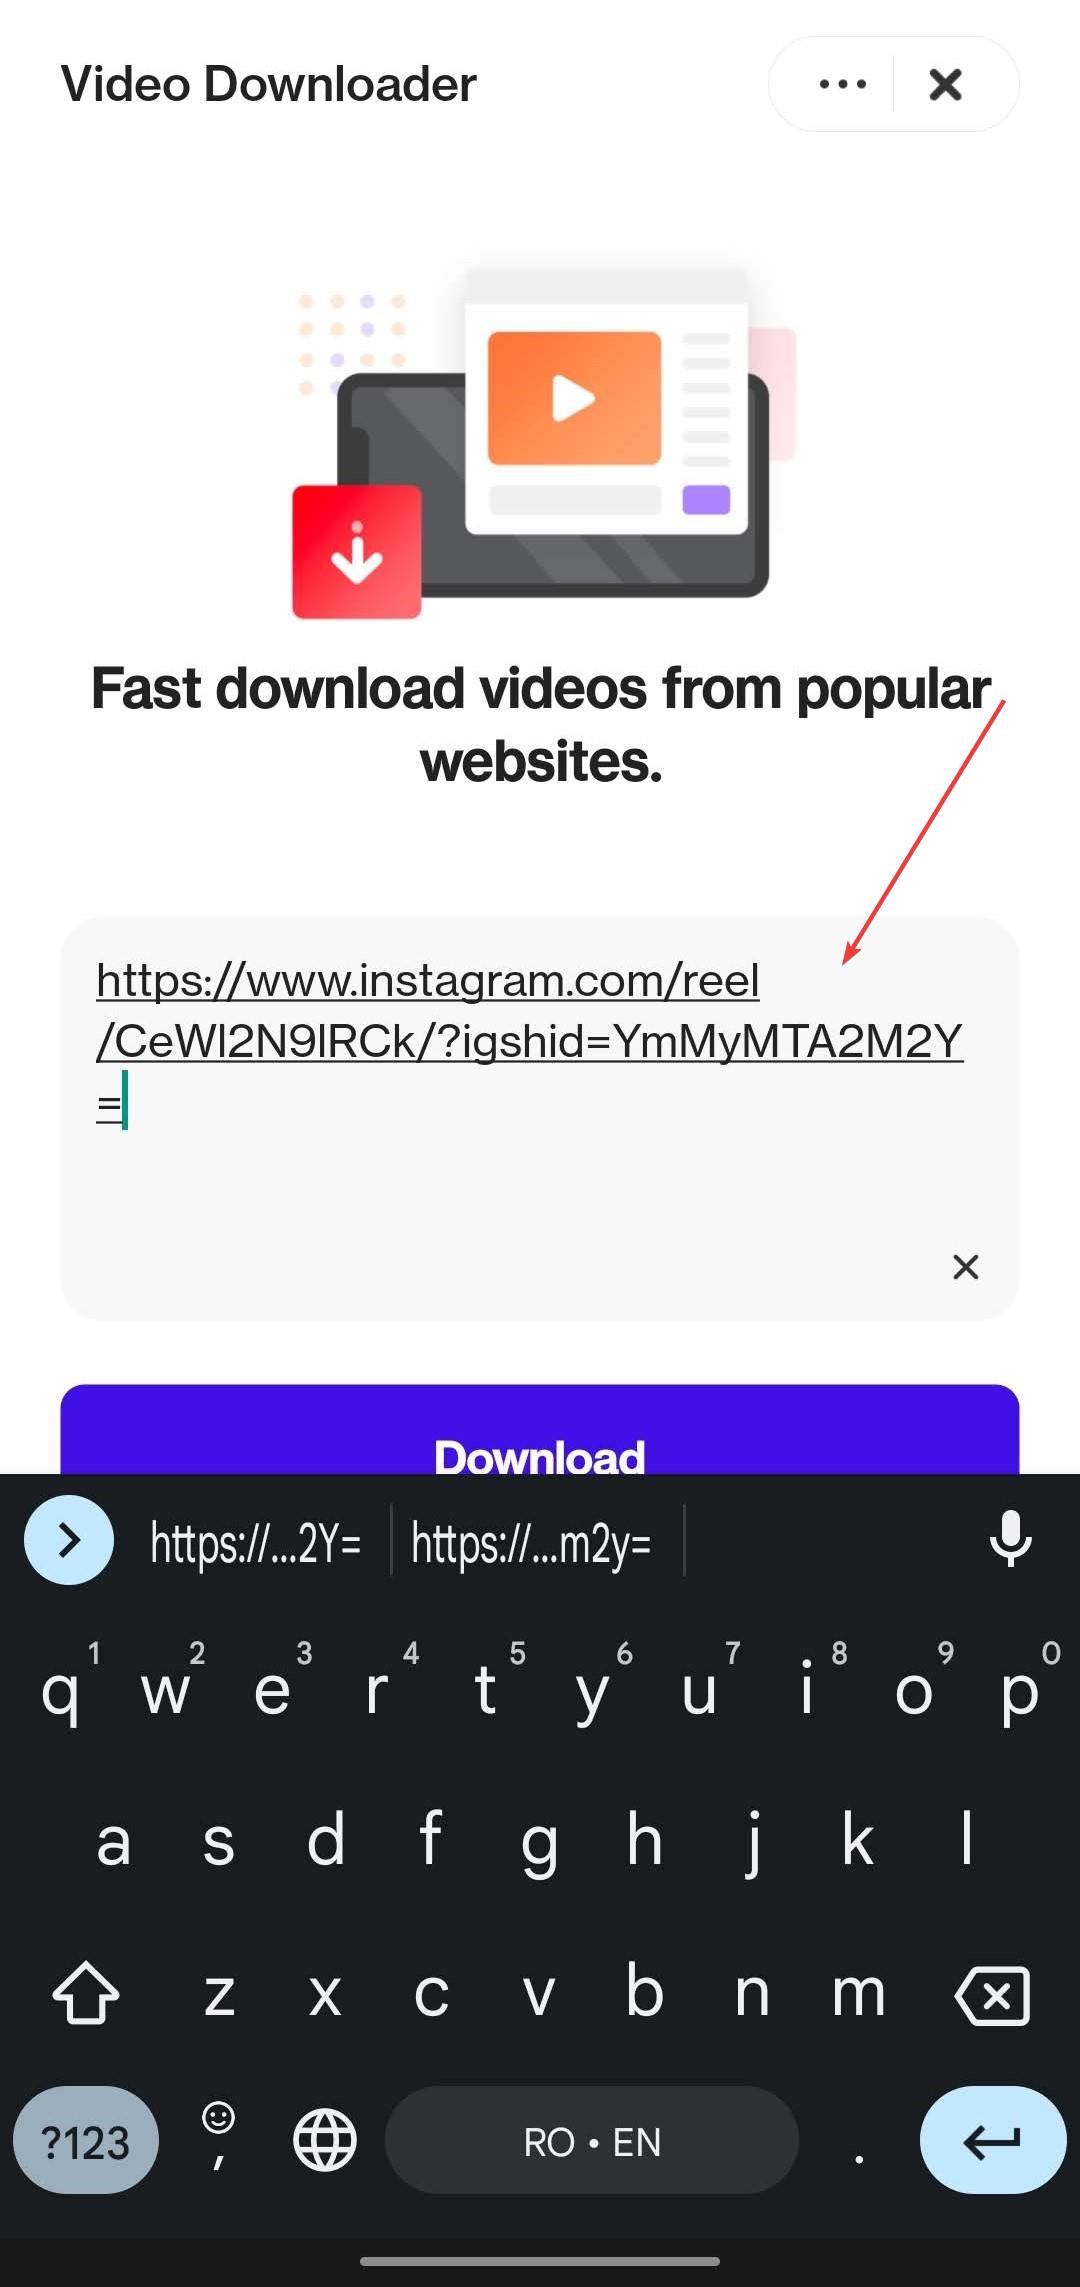 Paste URL and click Download.